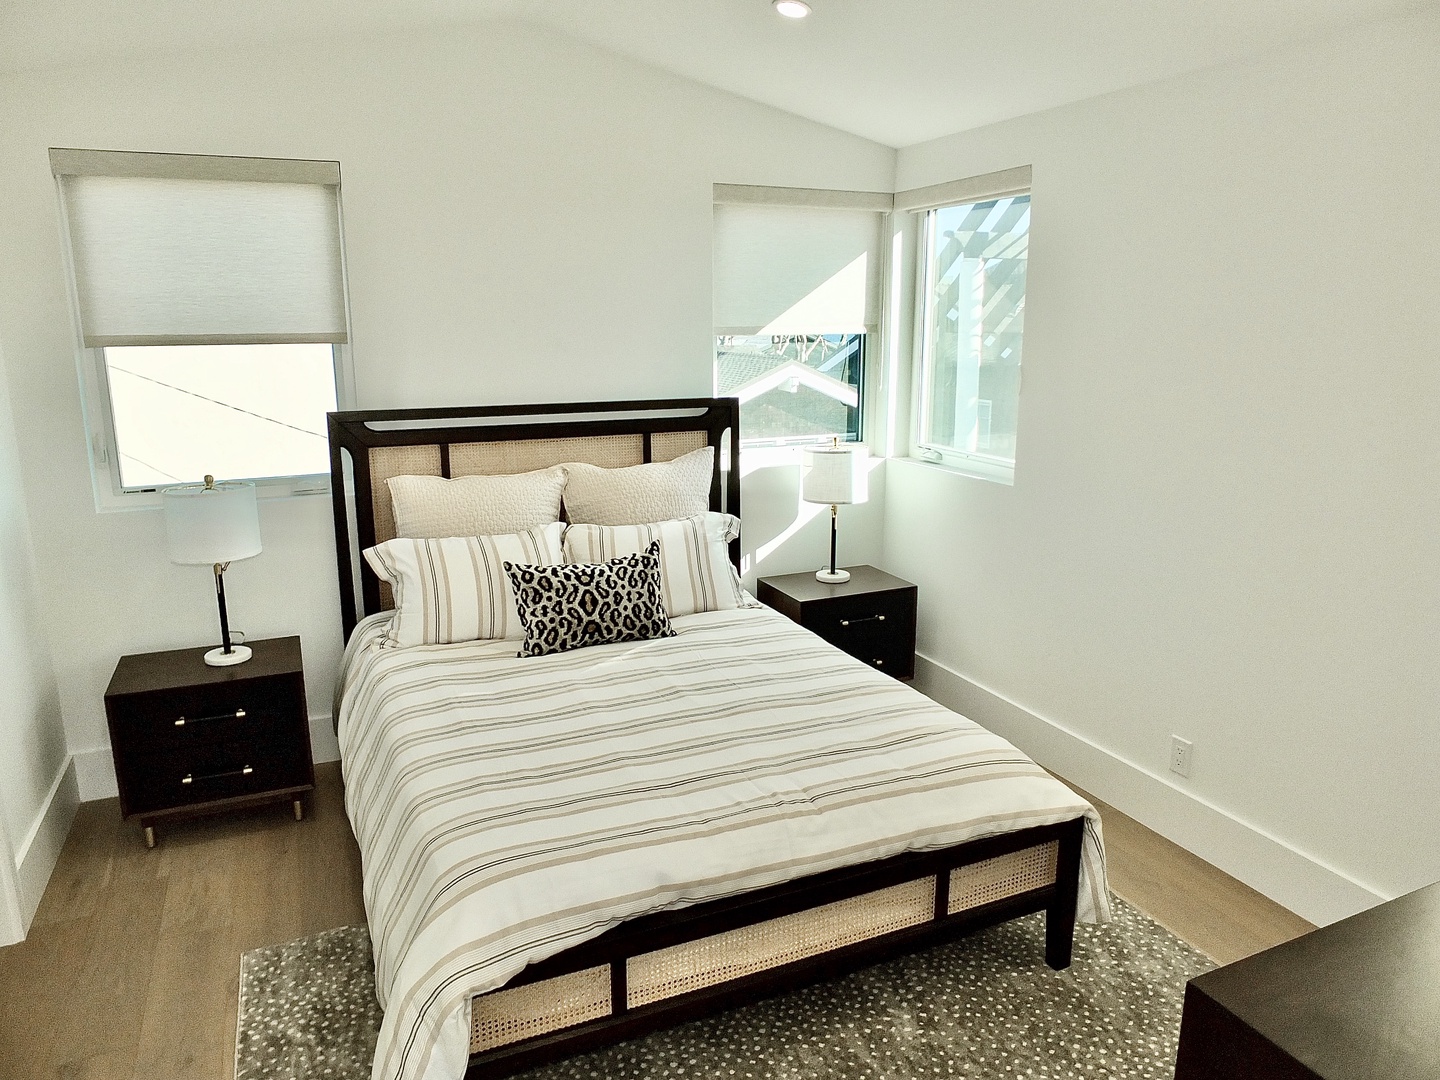 The 3rd-floor bedroom sanctuary offers a cozy queen-sized bed